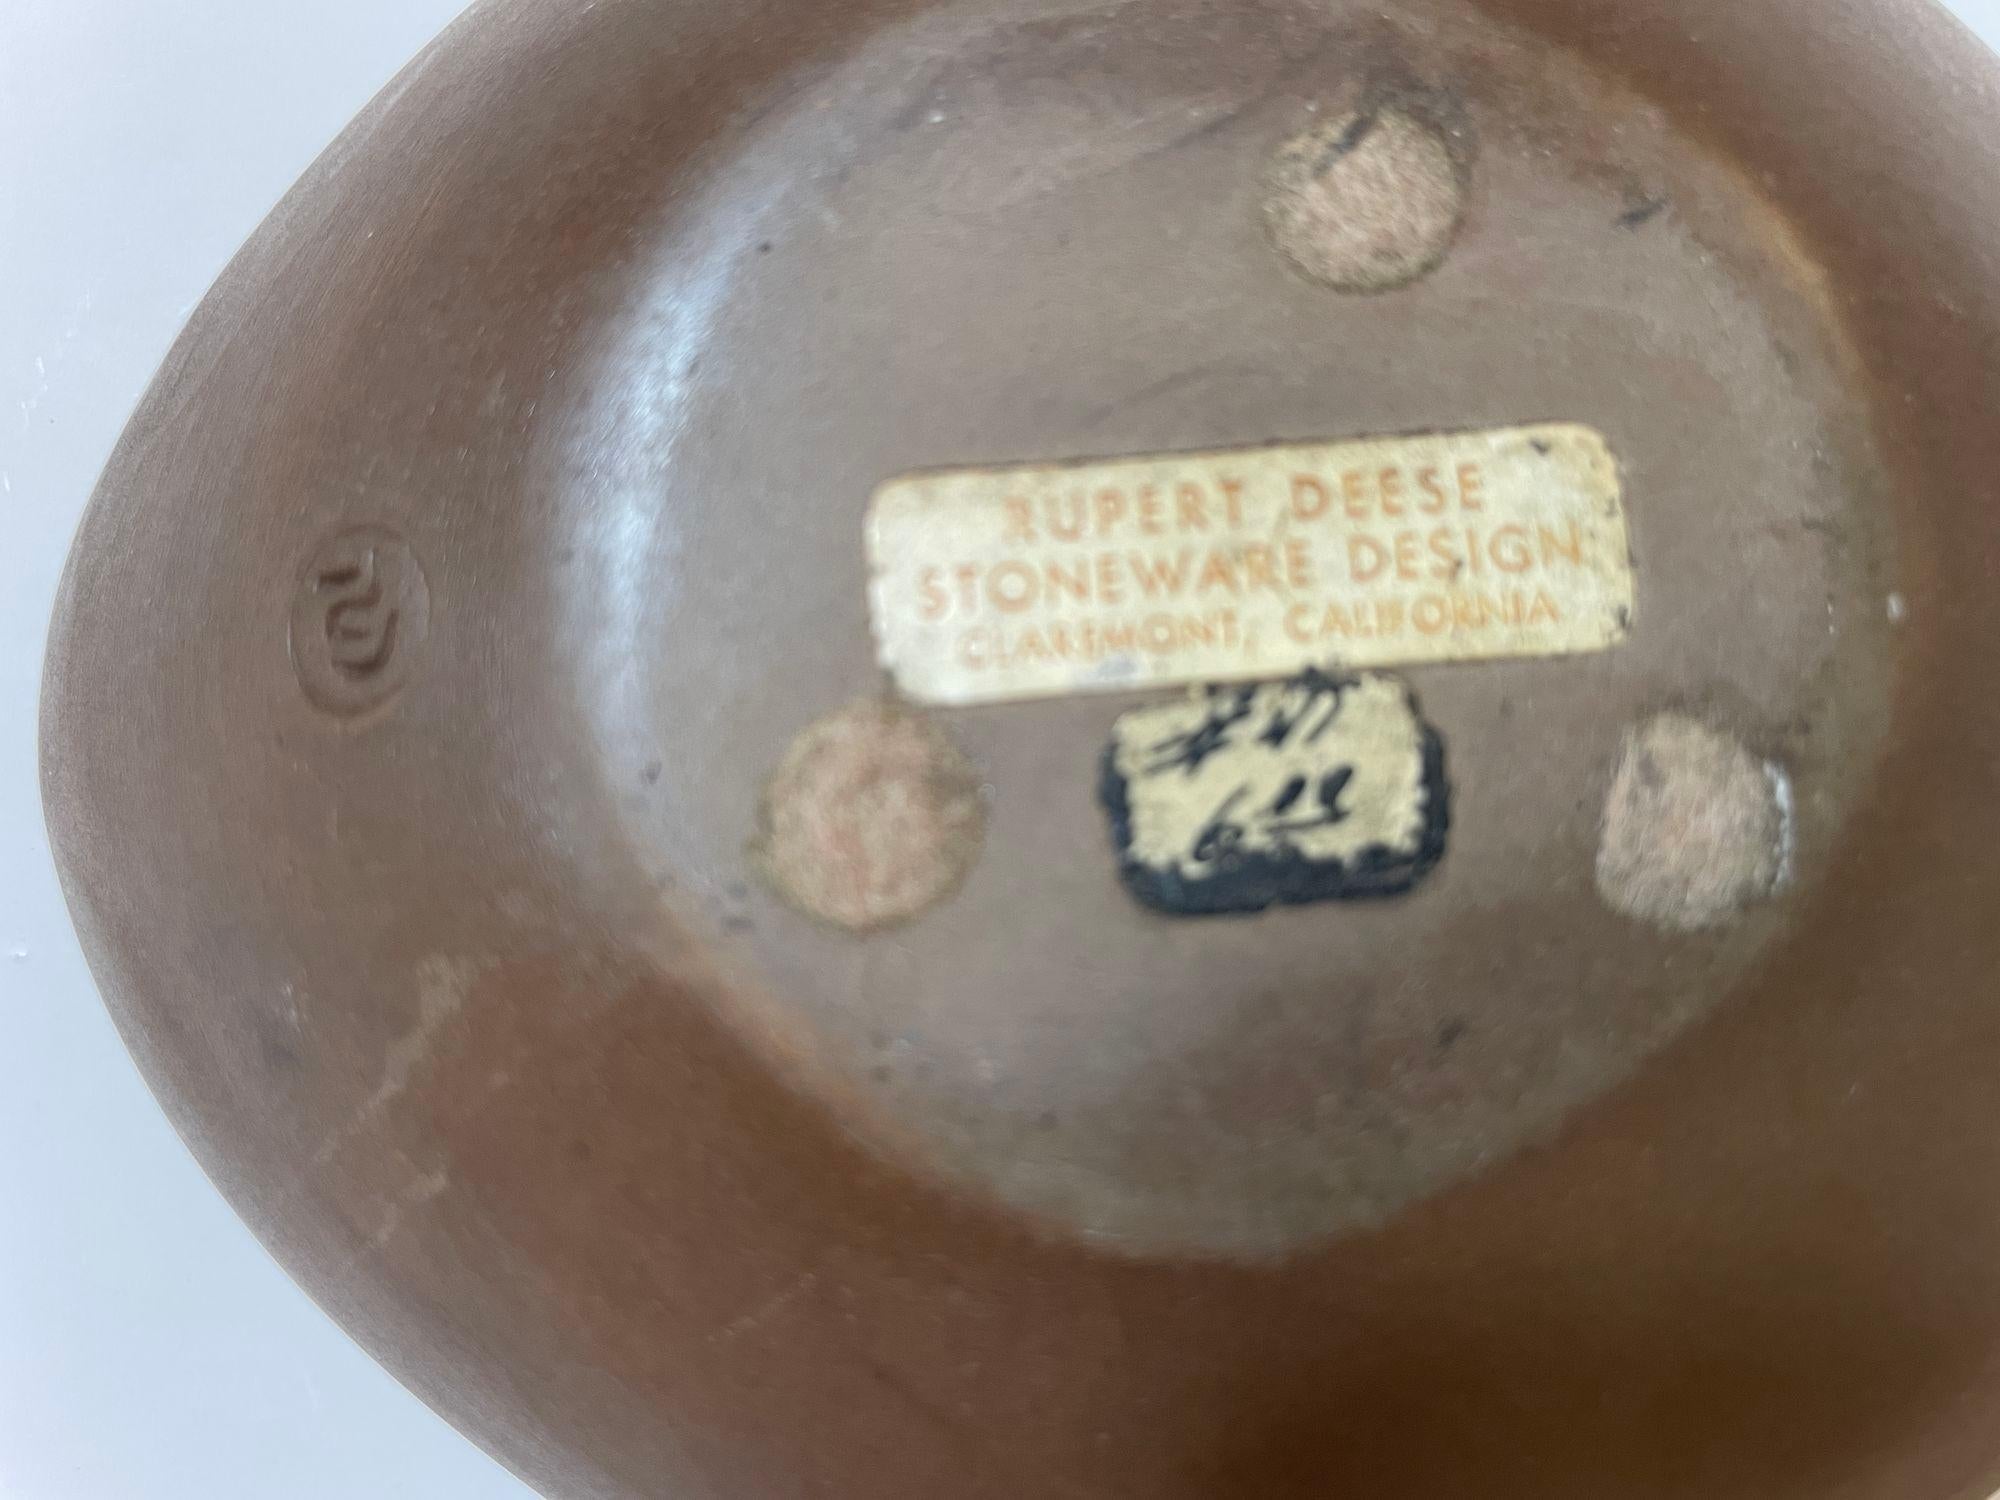 Hand-Crafted Rupert Deese Signed Mid-Century Modern California Studio Stoneware Ashtray For Sale